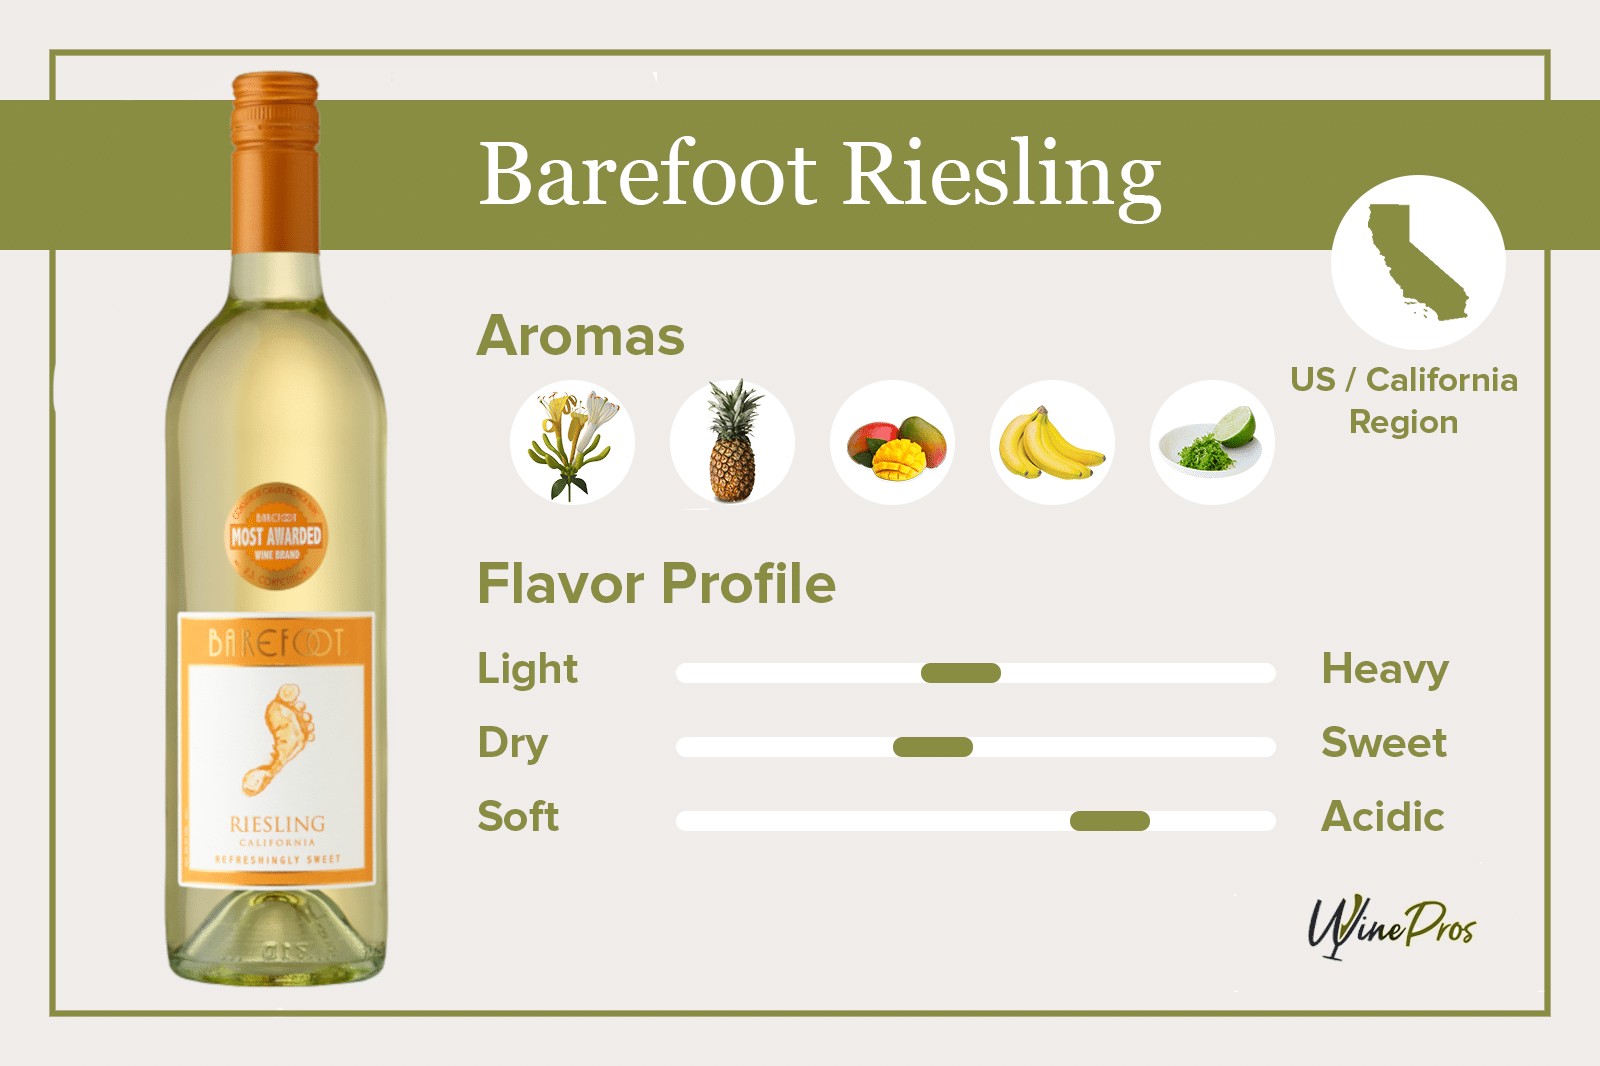 Barefoot Riesling Featured